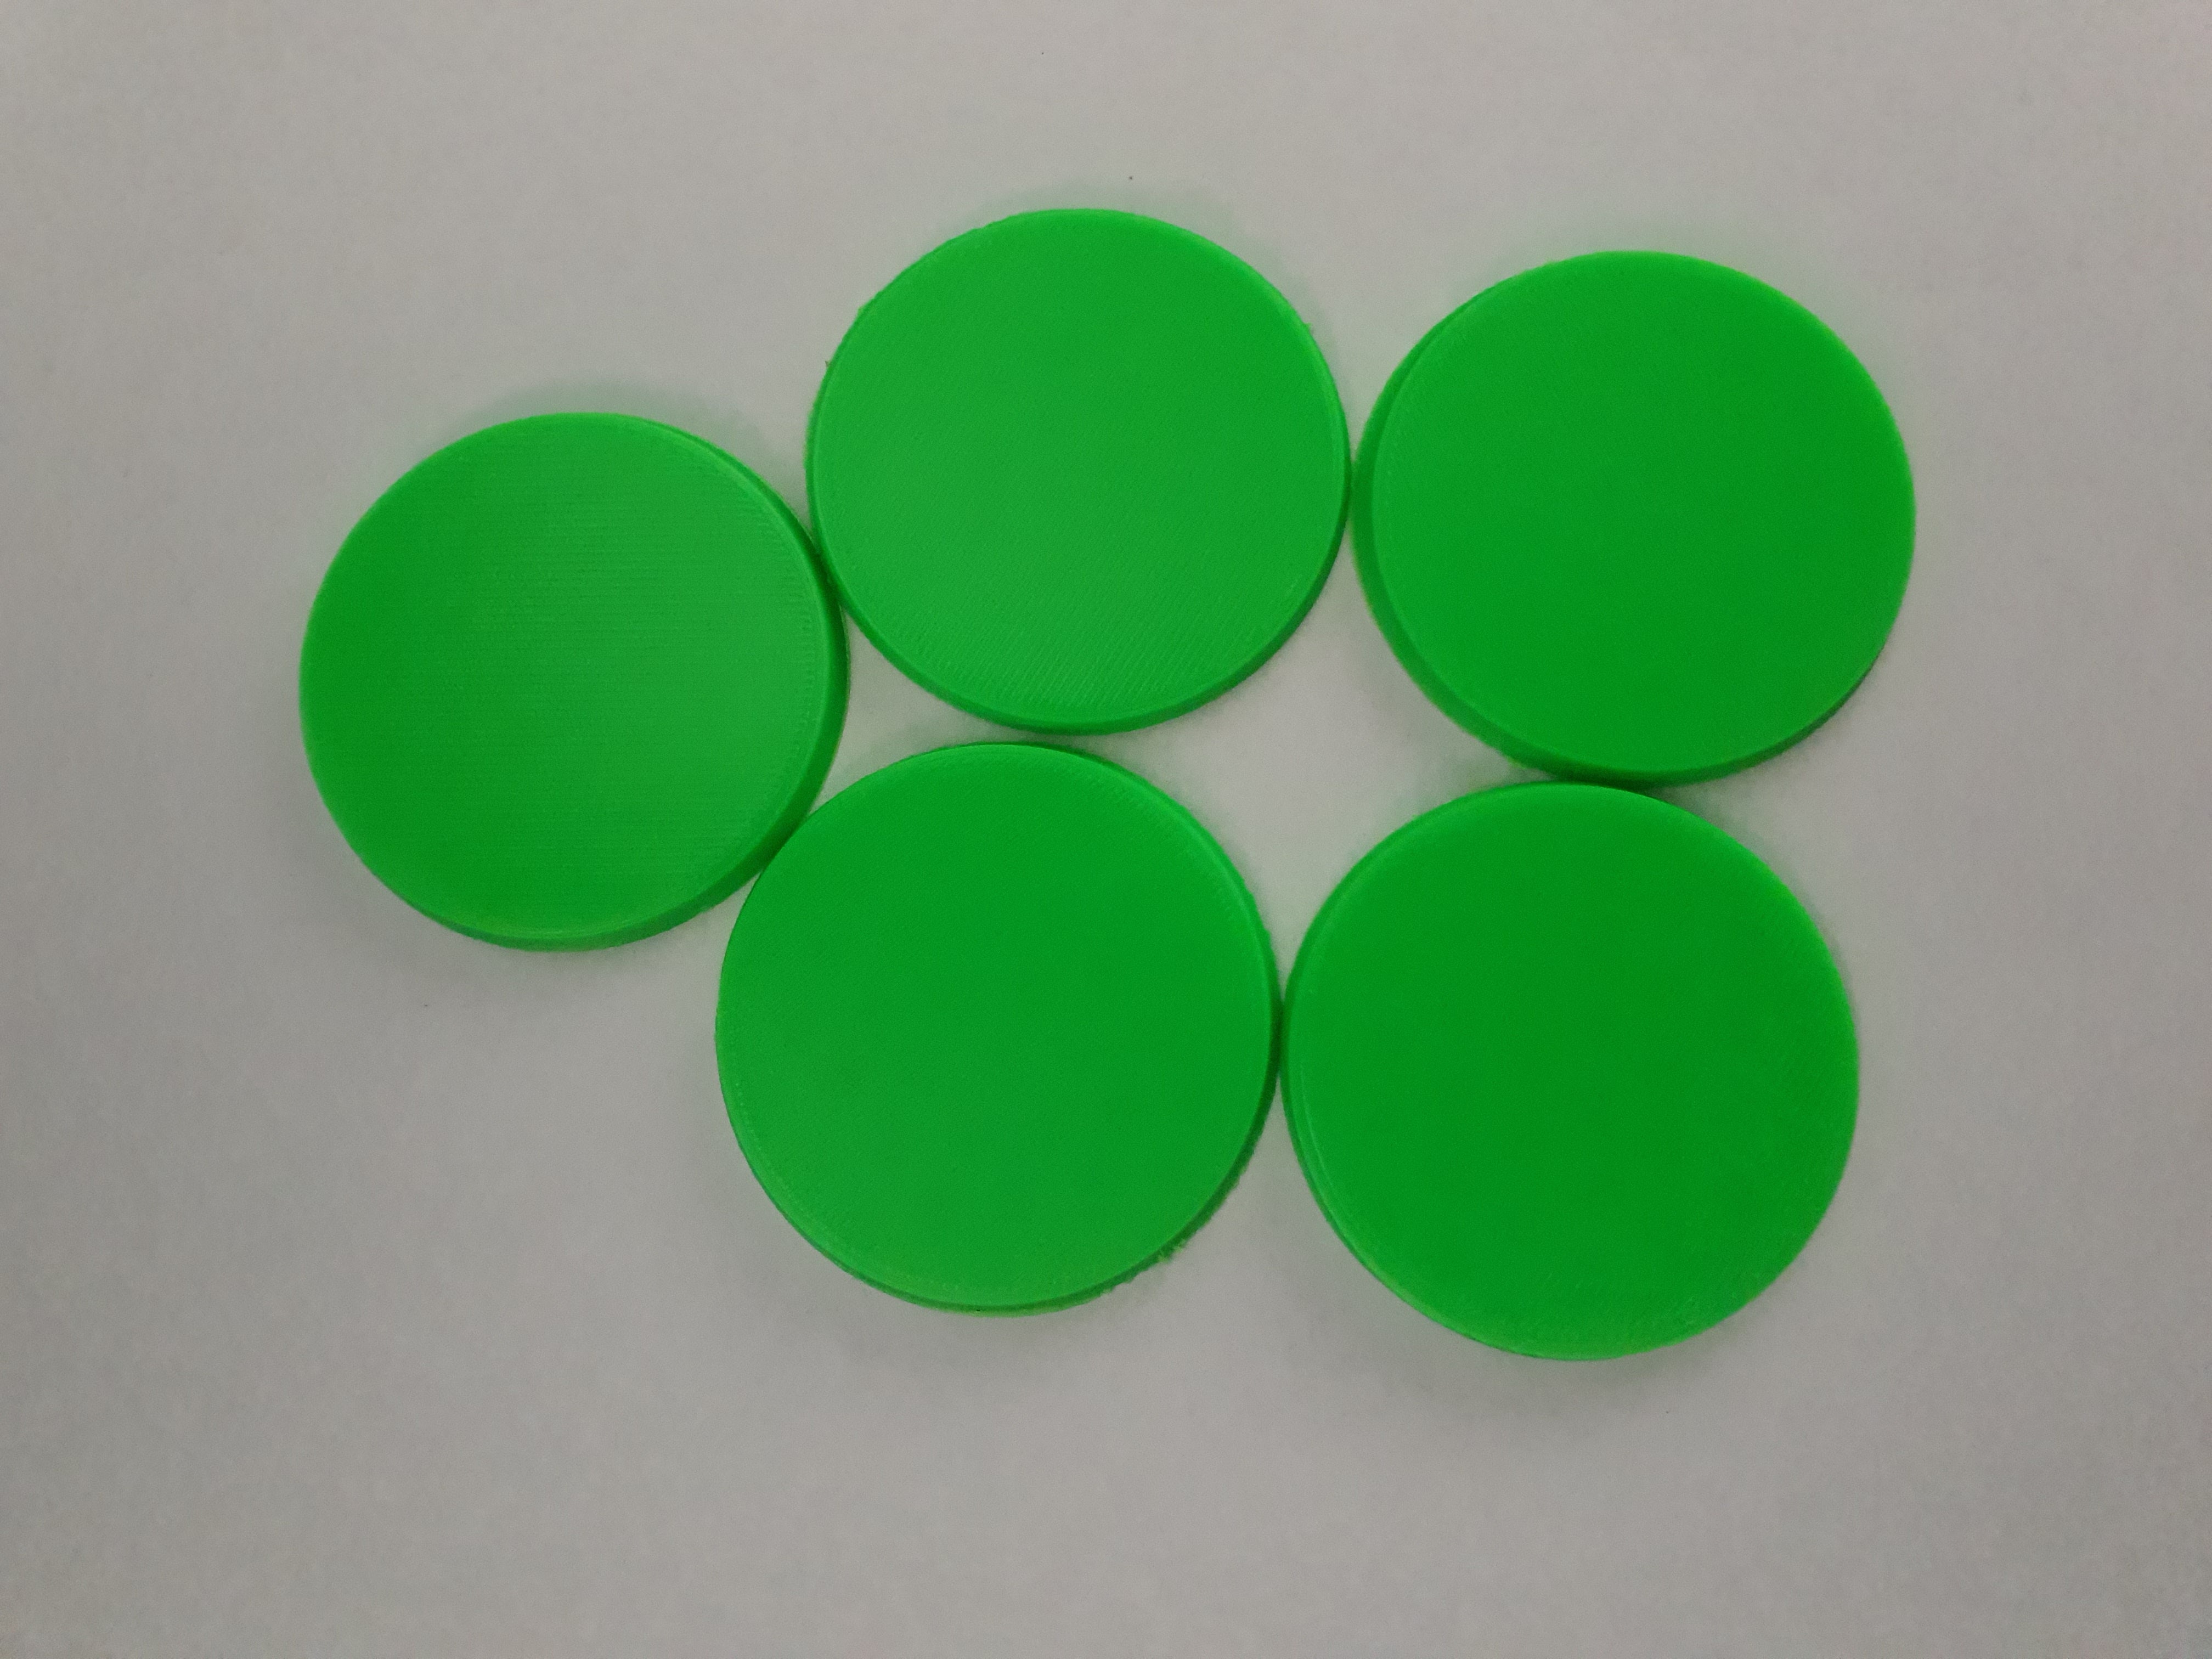 A Pack of 5x 50mm x 50mm Round Bases | Cracking-Singles